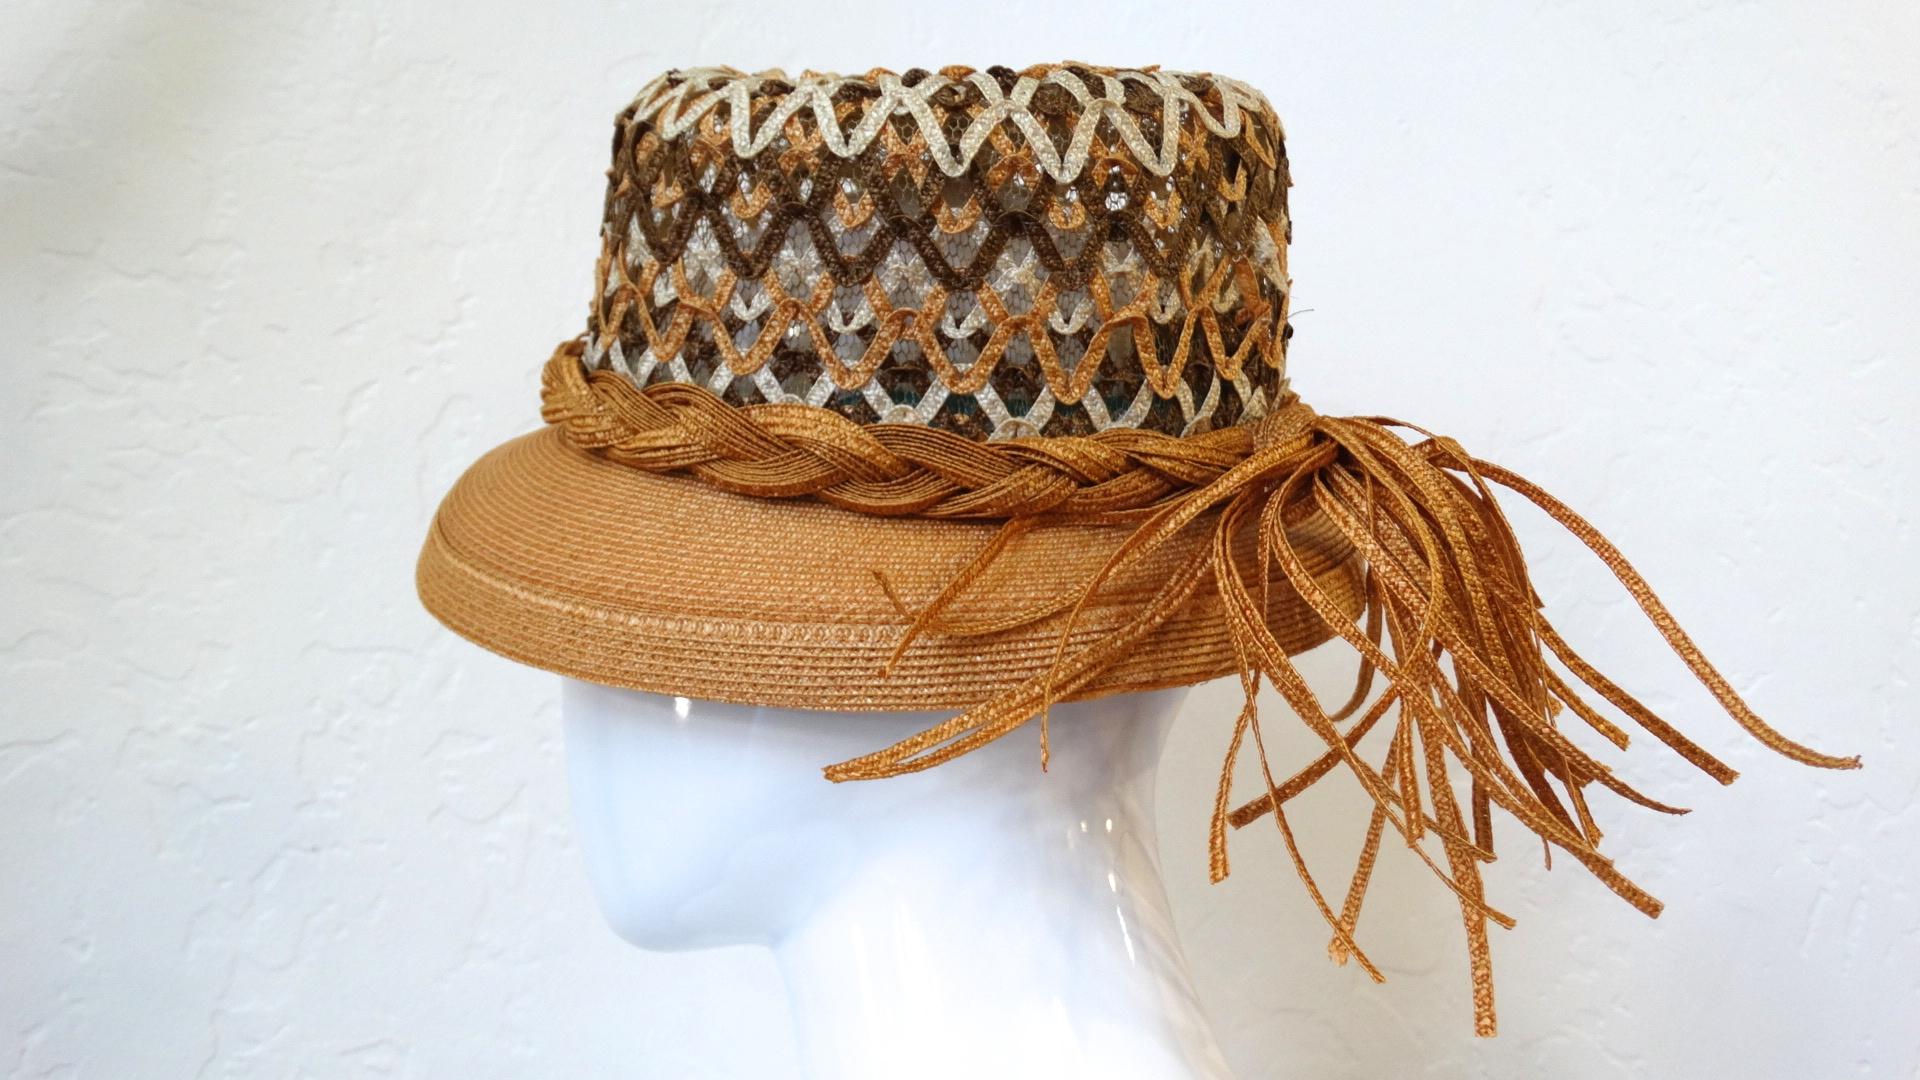 This amazing 1960s Yves Saint Laurent hat is a unique twist on the traditional boater style! Made of a quality woven straw material in contrasting shades of tan, brown and cream in an open weave at the top. Braided around the base of the hat with a